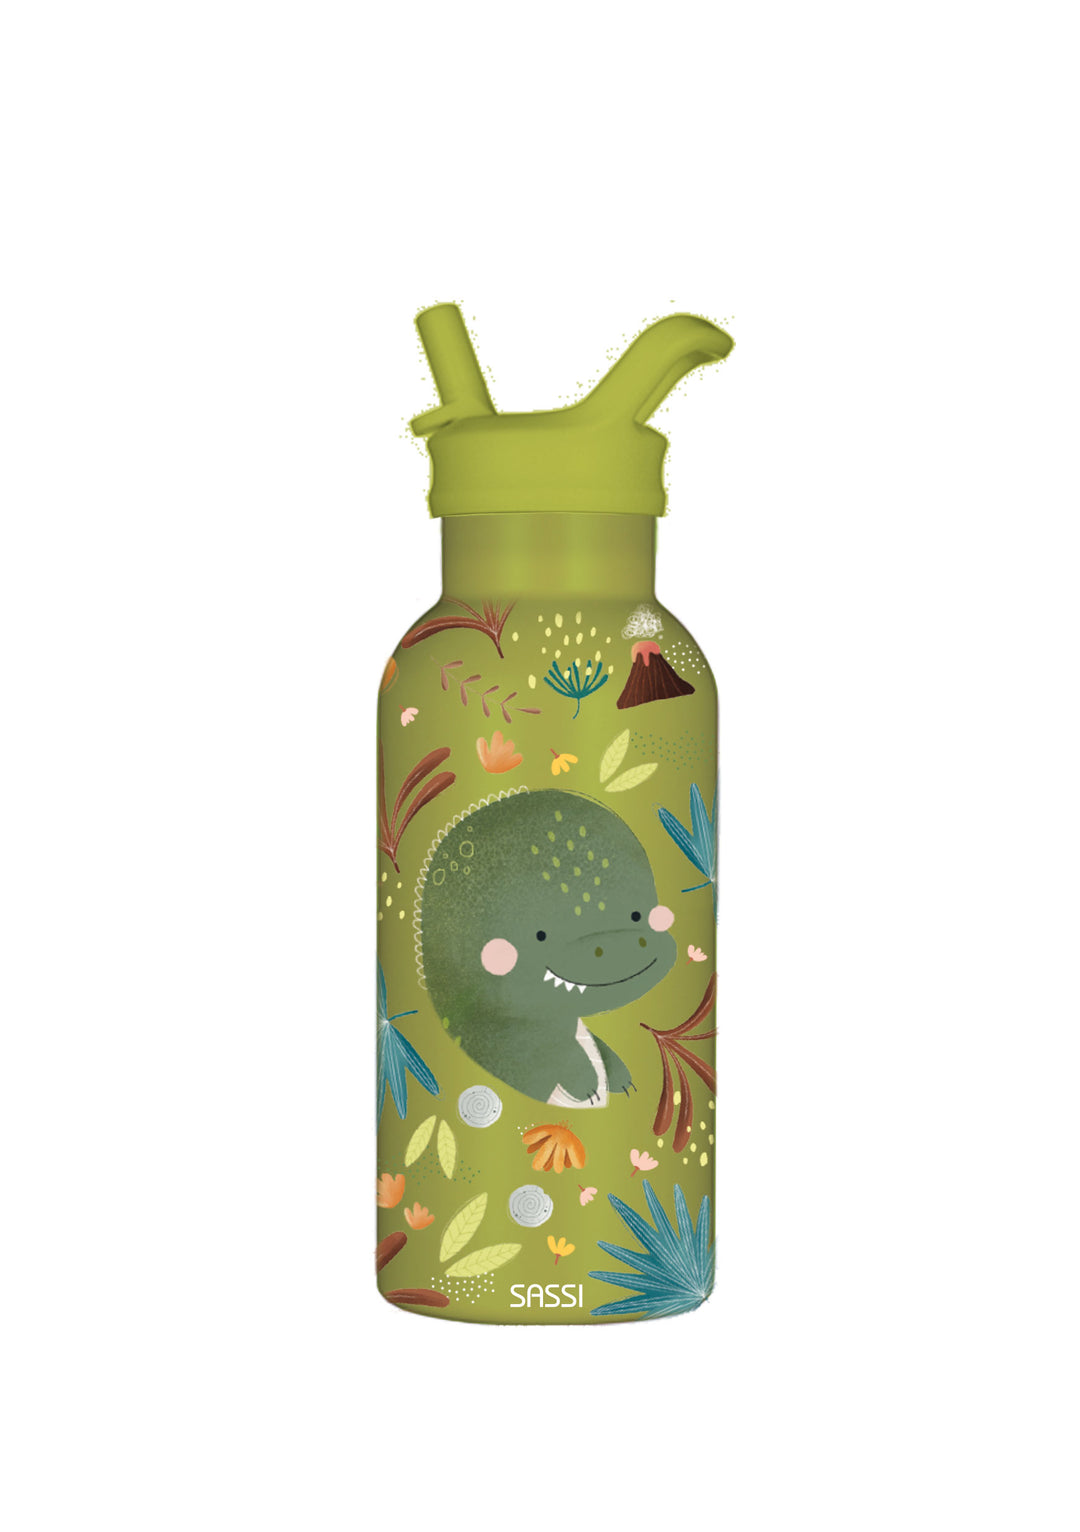 Sassi Vacuum Insulated Stainless Steel Drink Bottle 350 ml - Cracky the Dinosaur